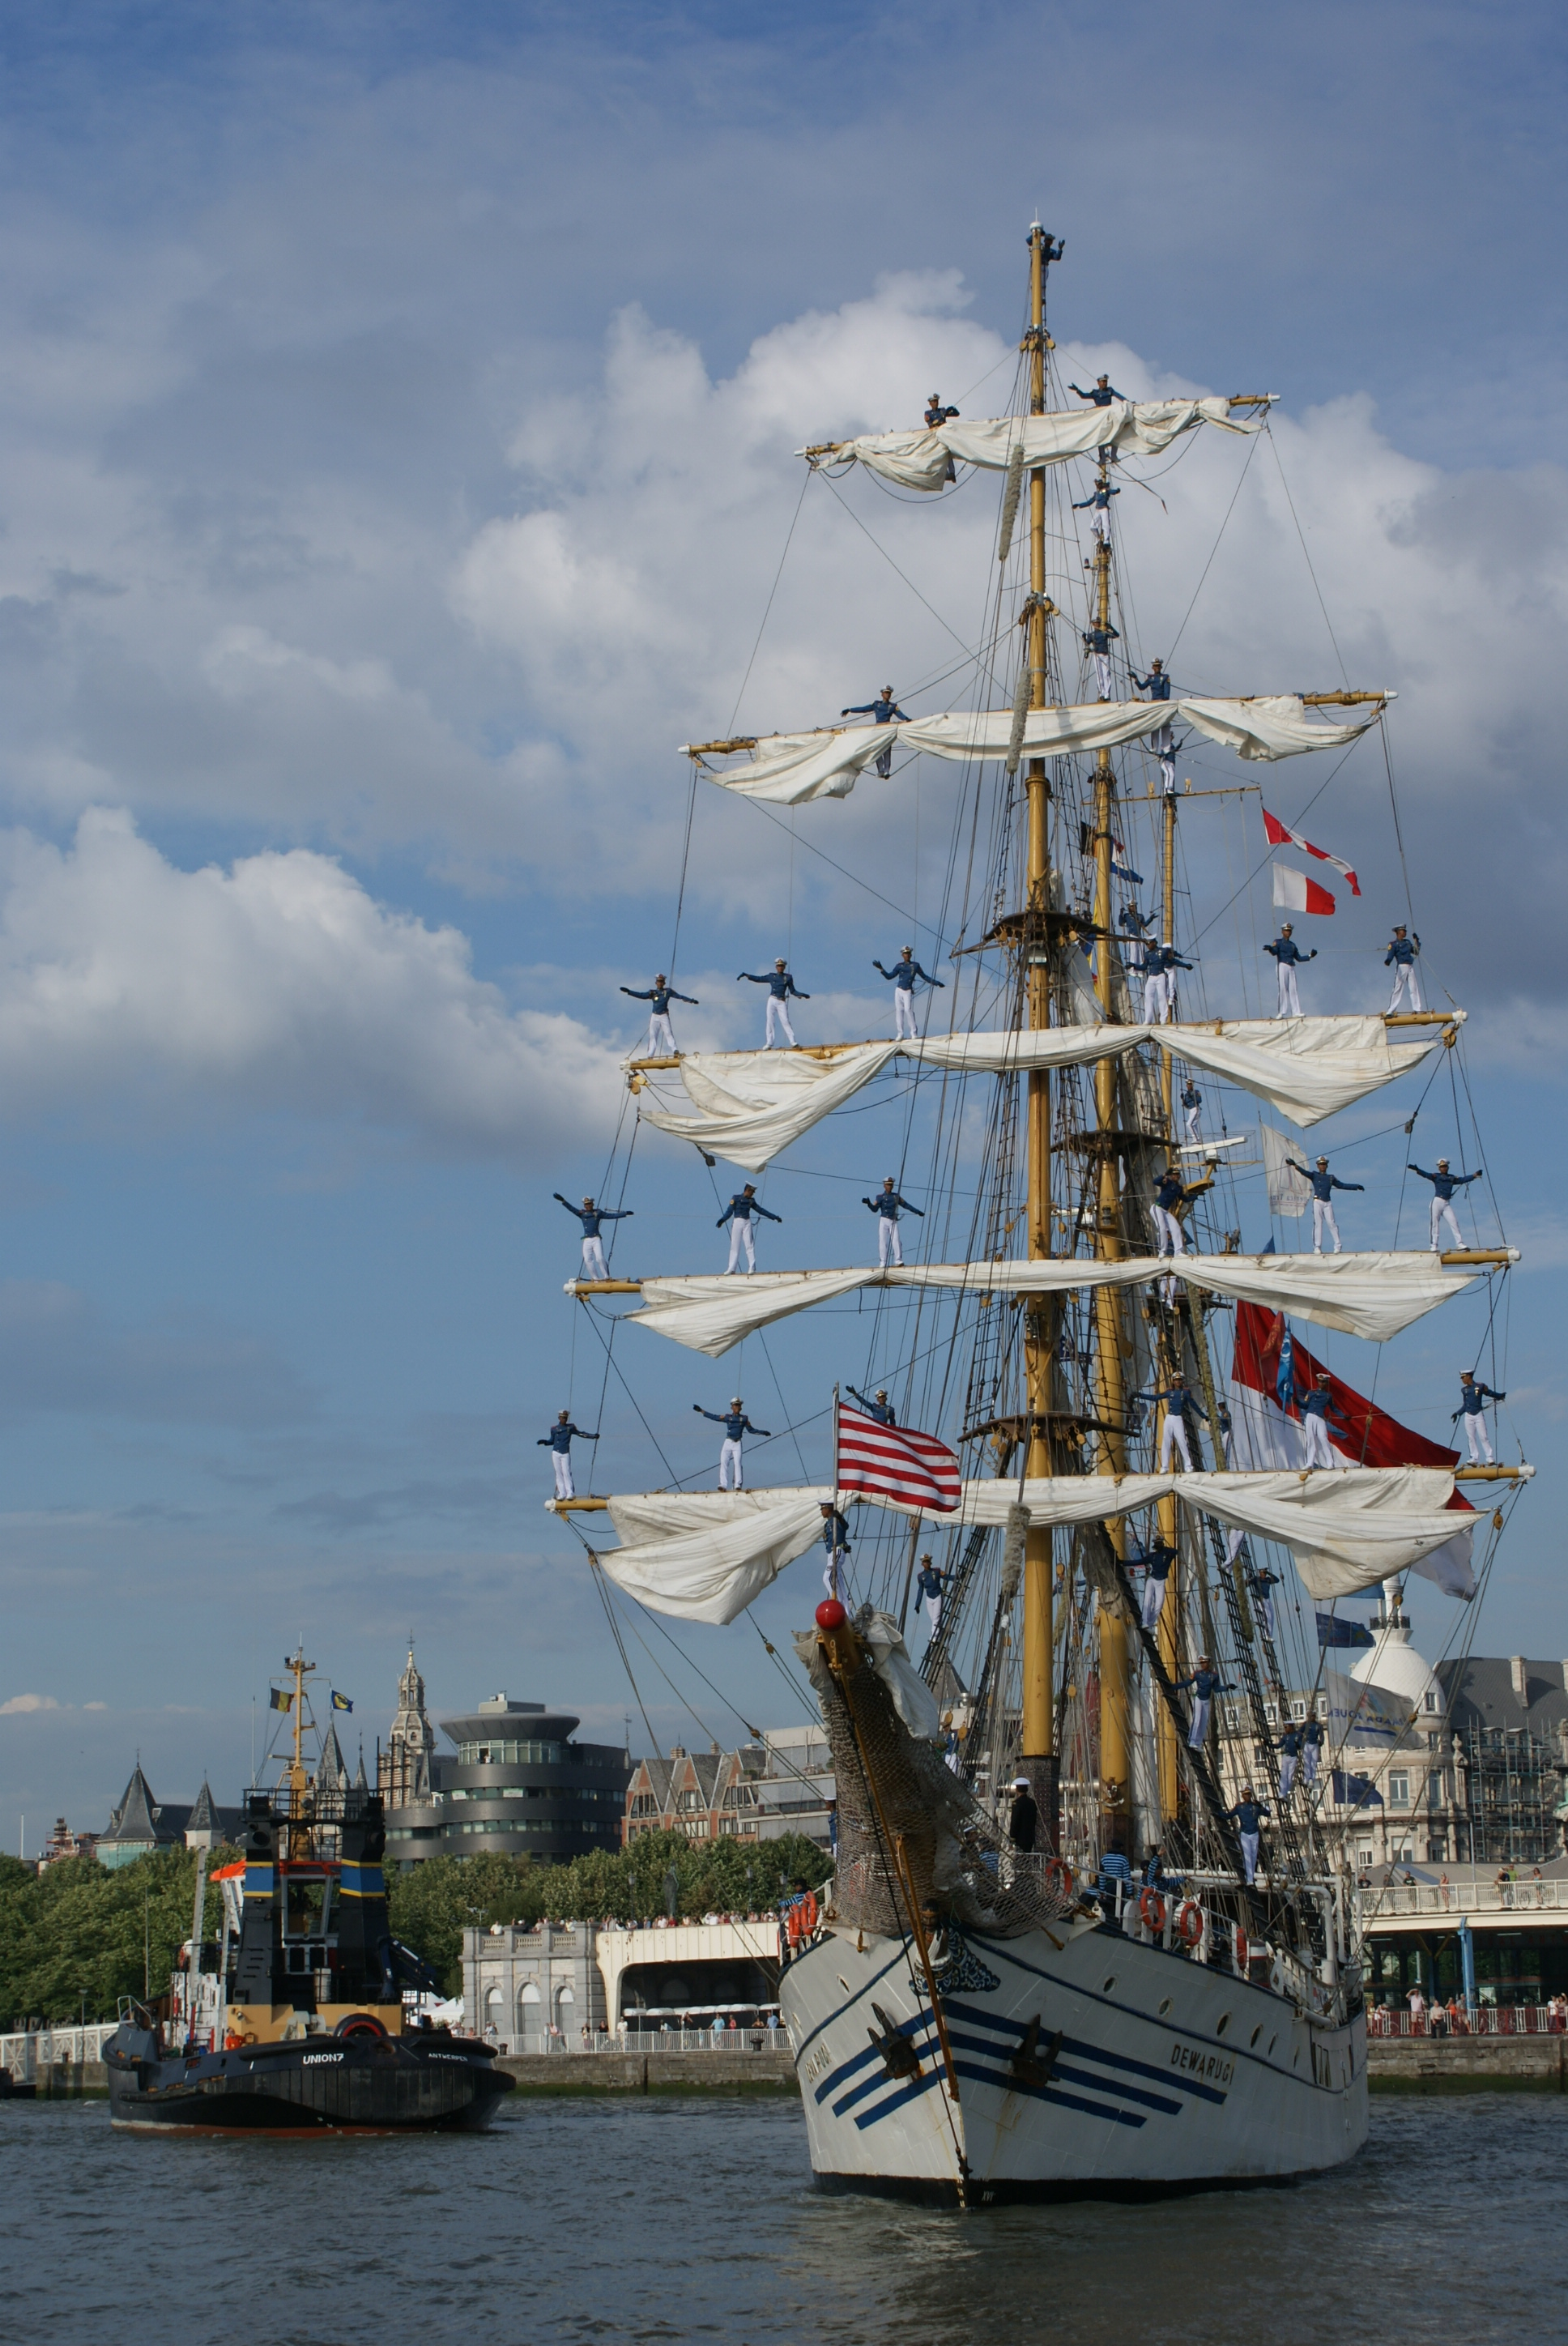 tall ships 2022 schedule usa